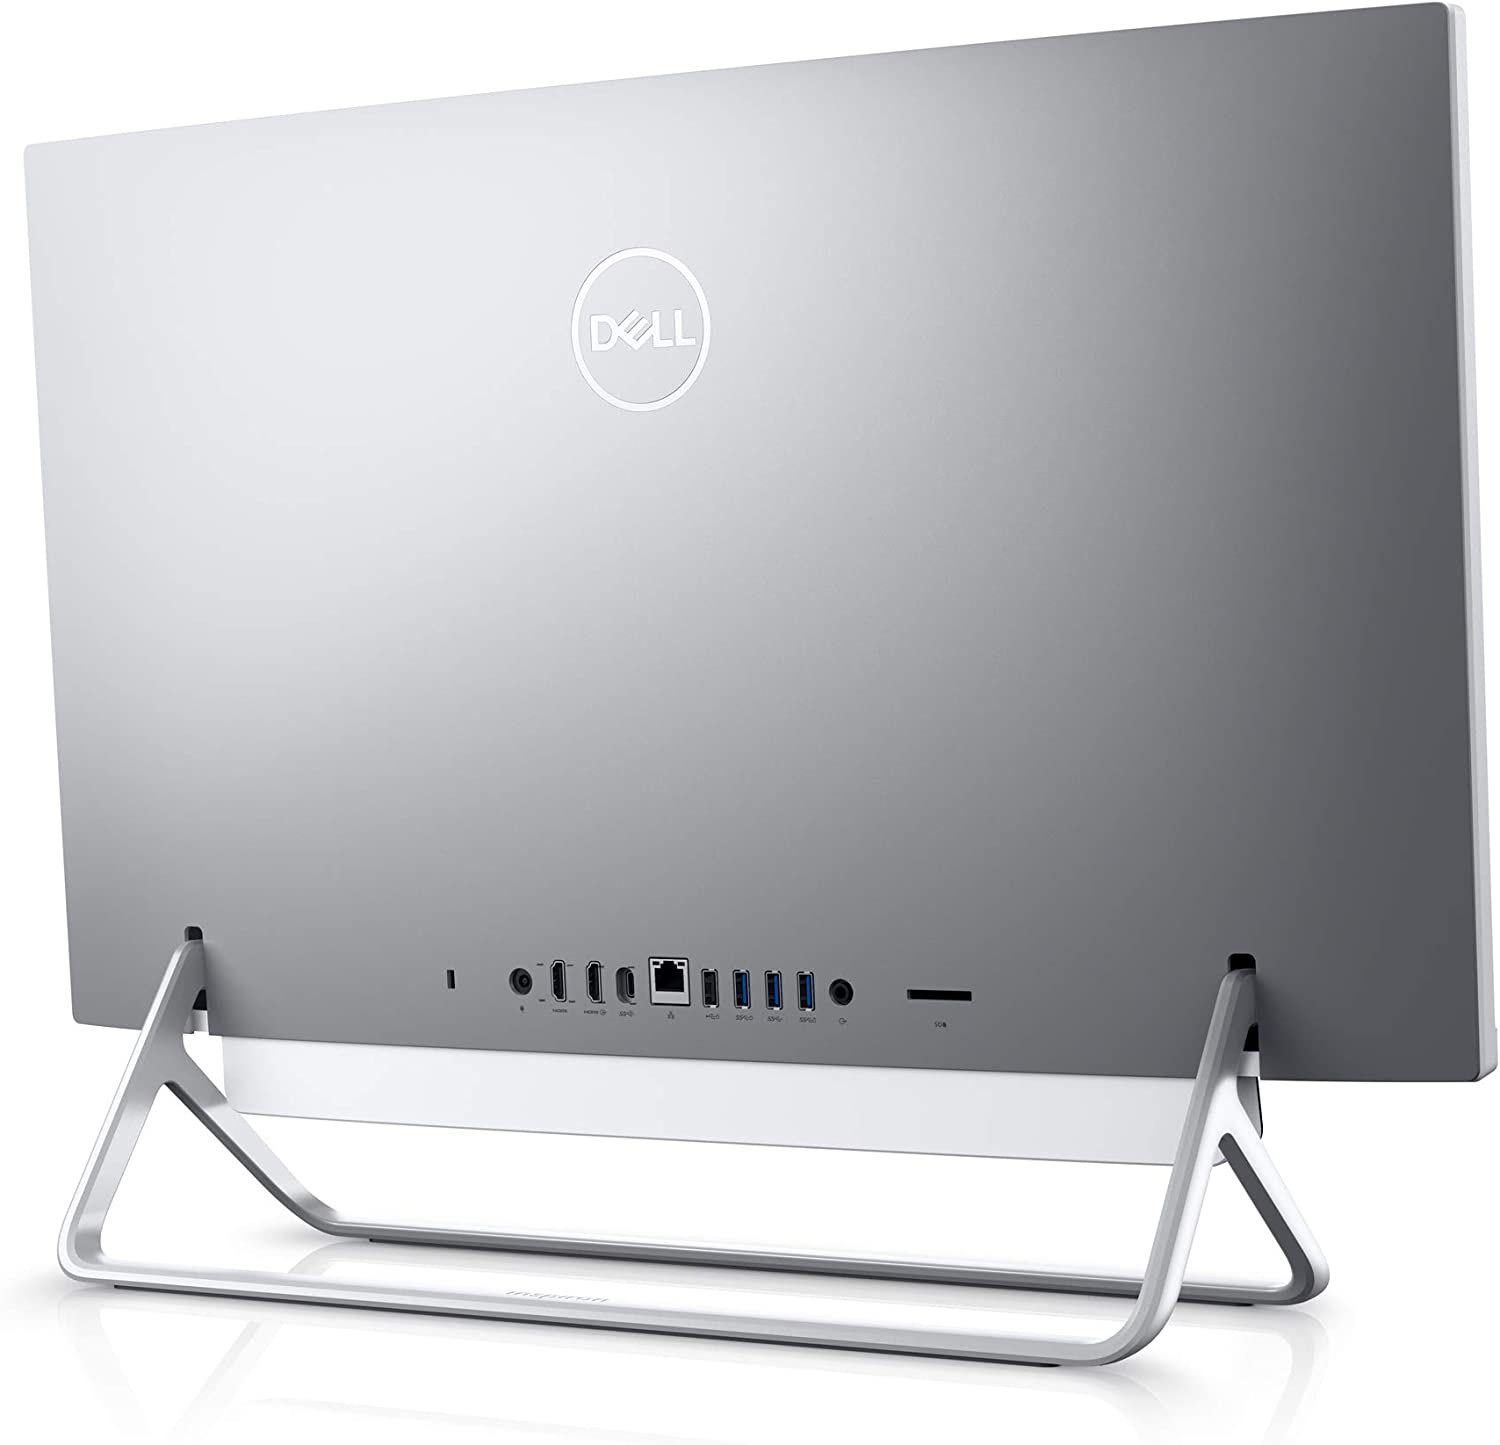 Dell Inspiron 7700 AIO Desktop, 27-inch FHD Infinity Touchscreen All in One, i7, 1165G7 - $820